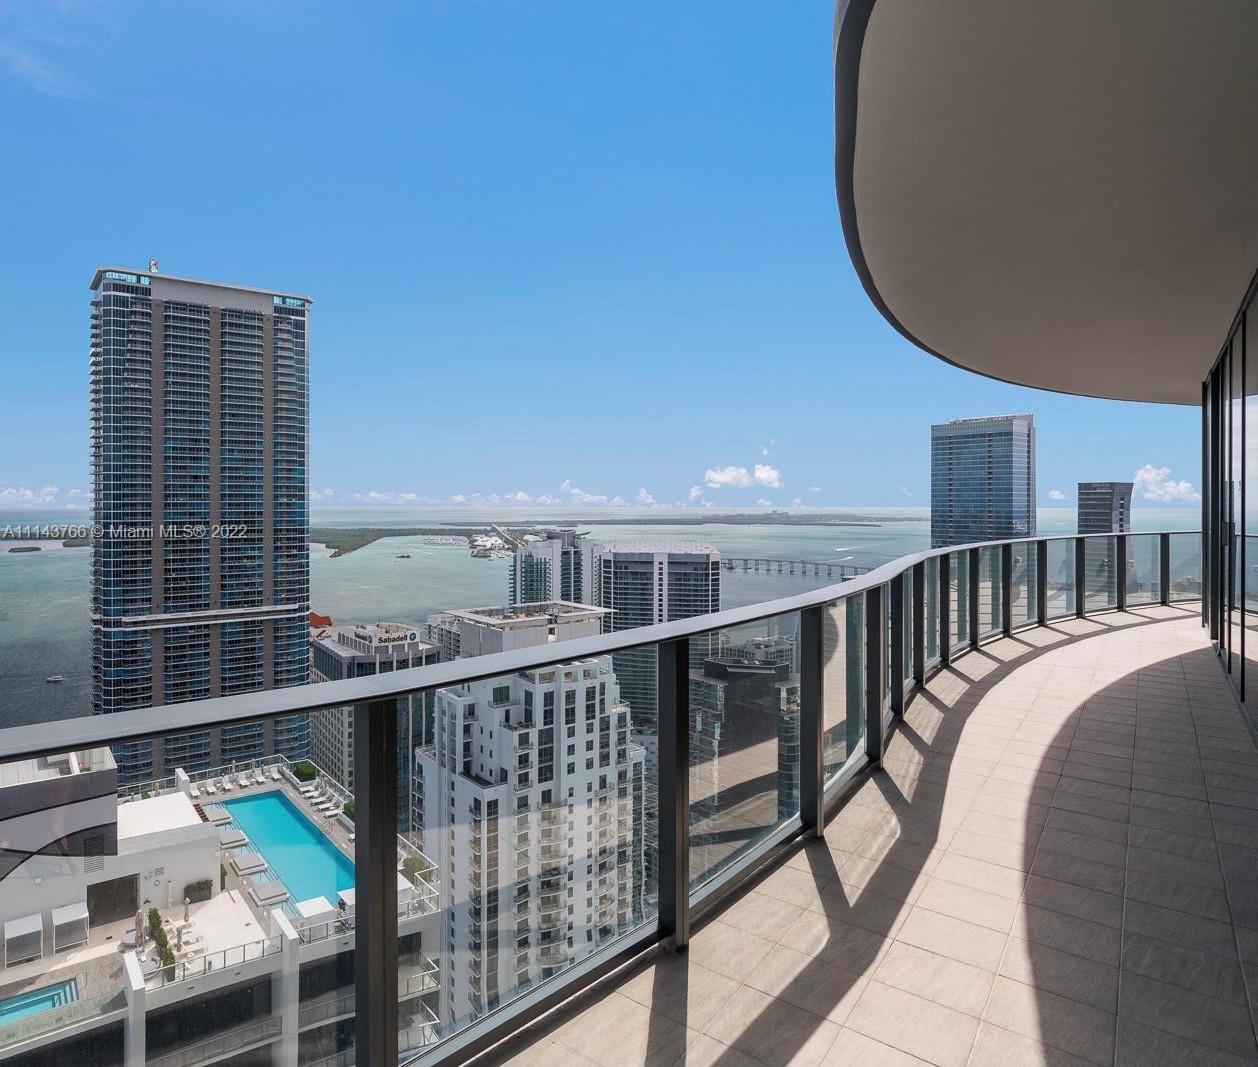 This Penthouse unit features 10-foot 6-inch high ceilings, floor-to-ceiling sliding glass balcony doors and energy-efficient, casement windows Spacious private balconies with Brickell City Skyline views.
The amenities at Brickell Flatiron are some of the best in the city. Among them are a rooftop pool located on the 64th-floor offering 360-degree, unobstructed water and city views; a rooftop spa and fitness center with private steam, sauna, and locker facilities; an 18th-floor lap pool; a children’s playroom and pool; a full-time doorman and concierge; a private movie theater; wine room and cellar; and social lounge. On the ground-floor level, Brickell Flatiron has a fine-dining restaurant called Sexy Fish.